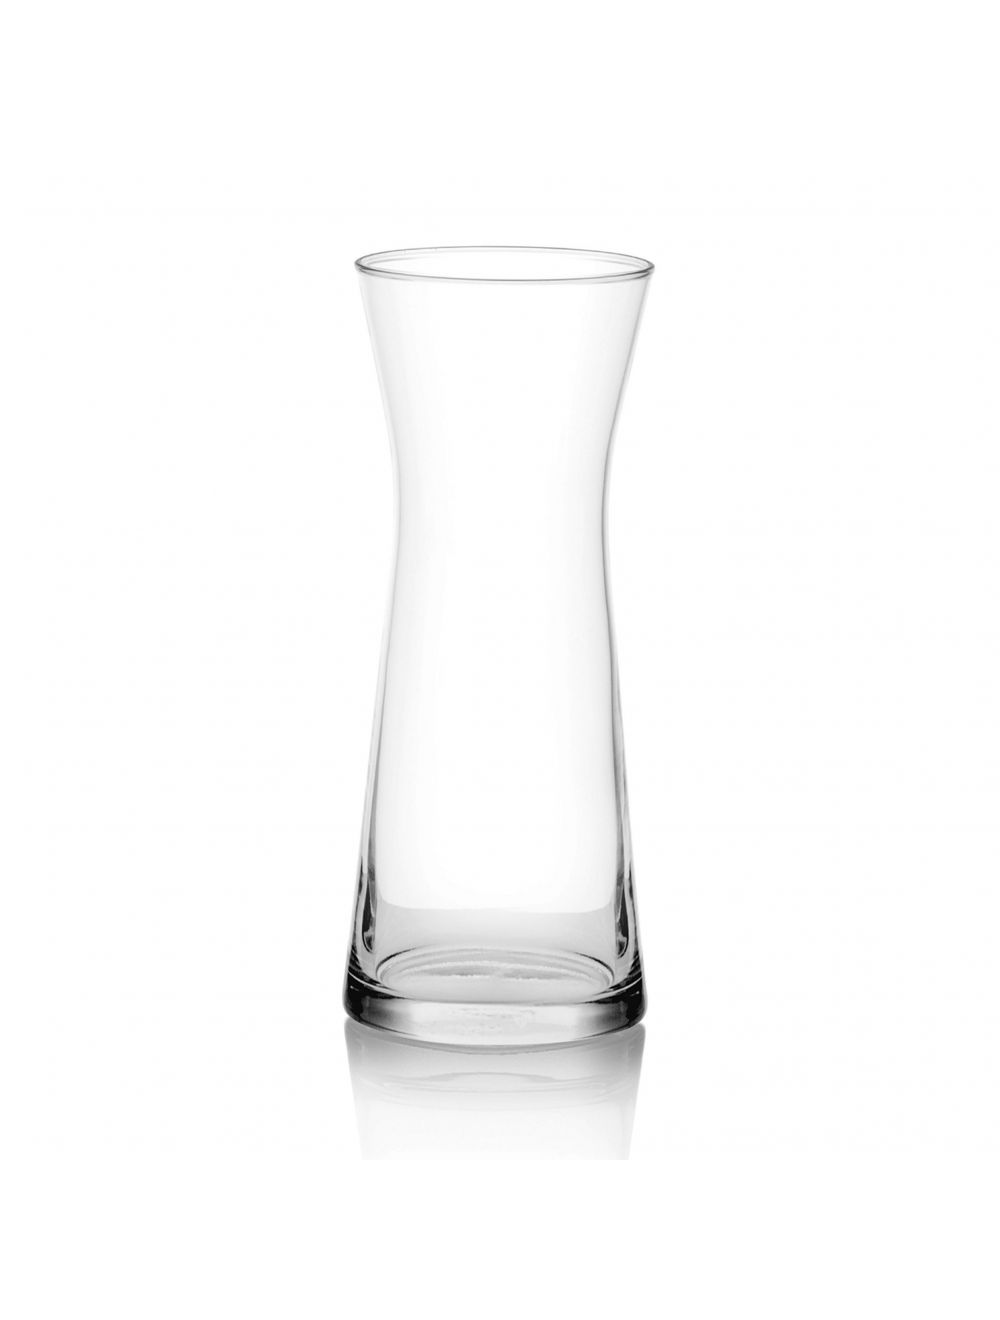 Ocean Tempo Carafe Glass 290ml Pack Of 6